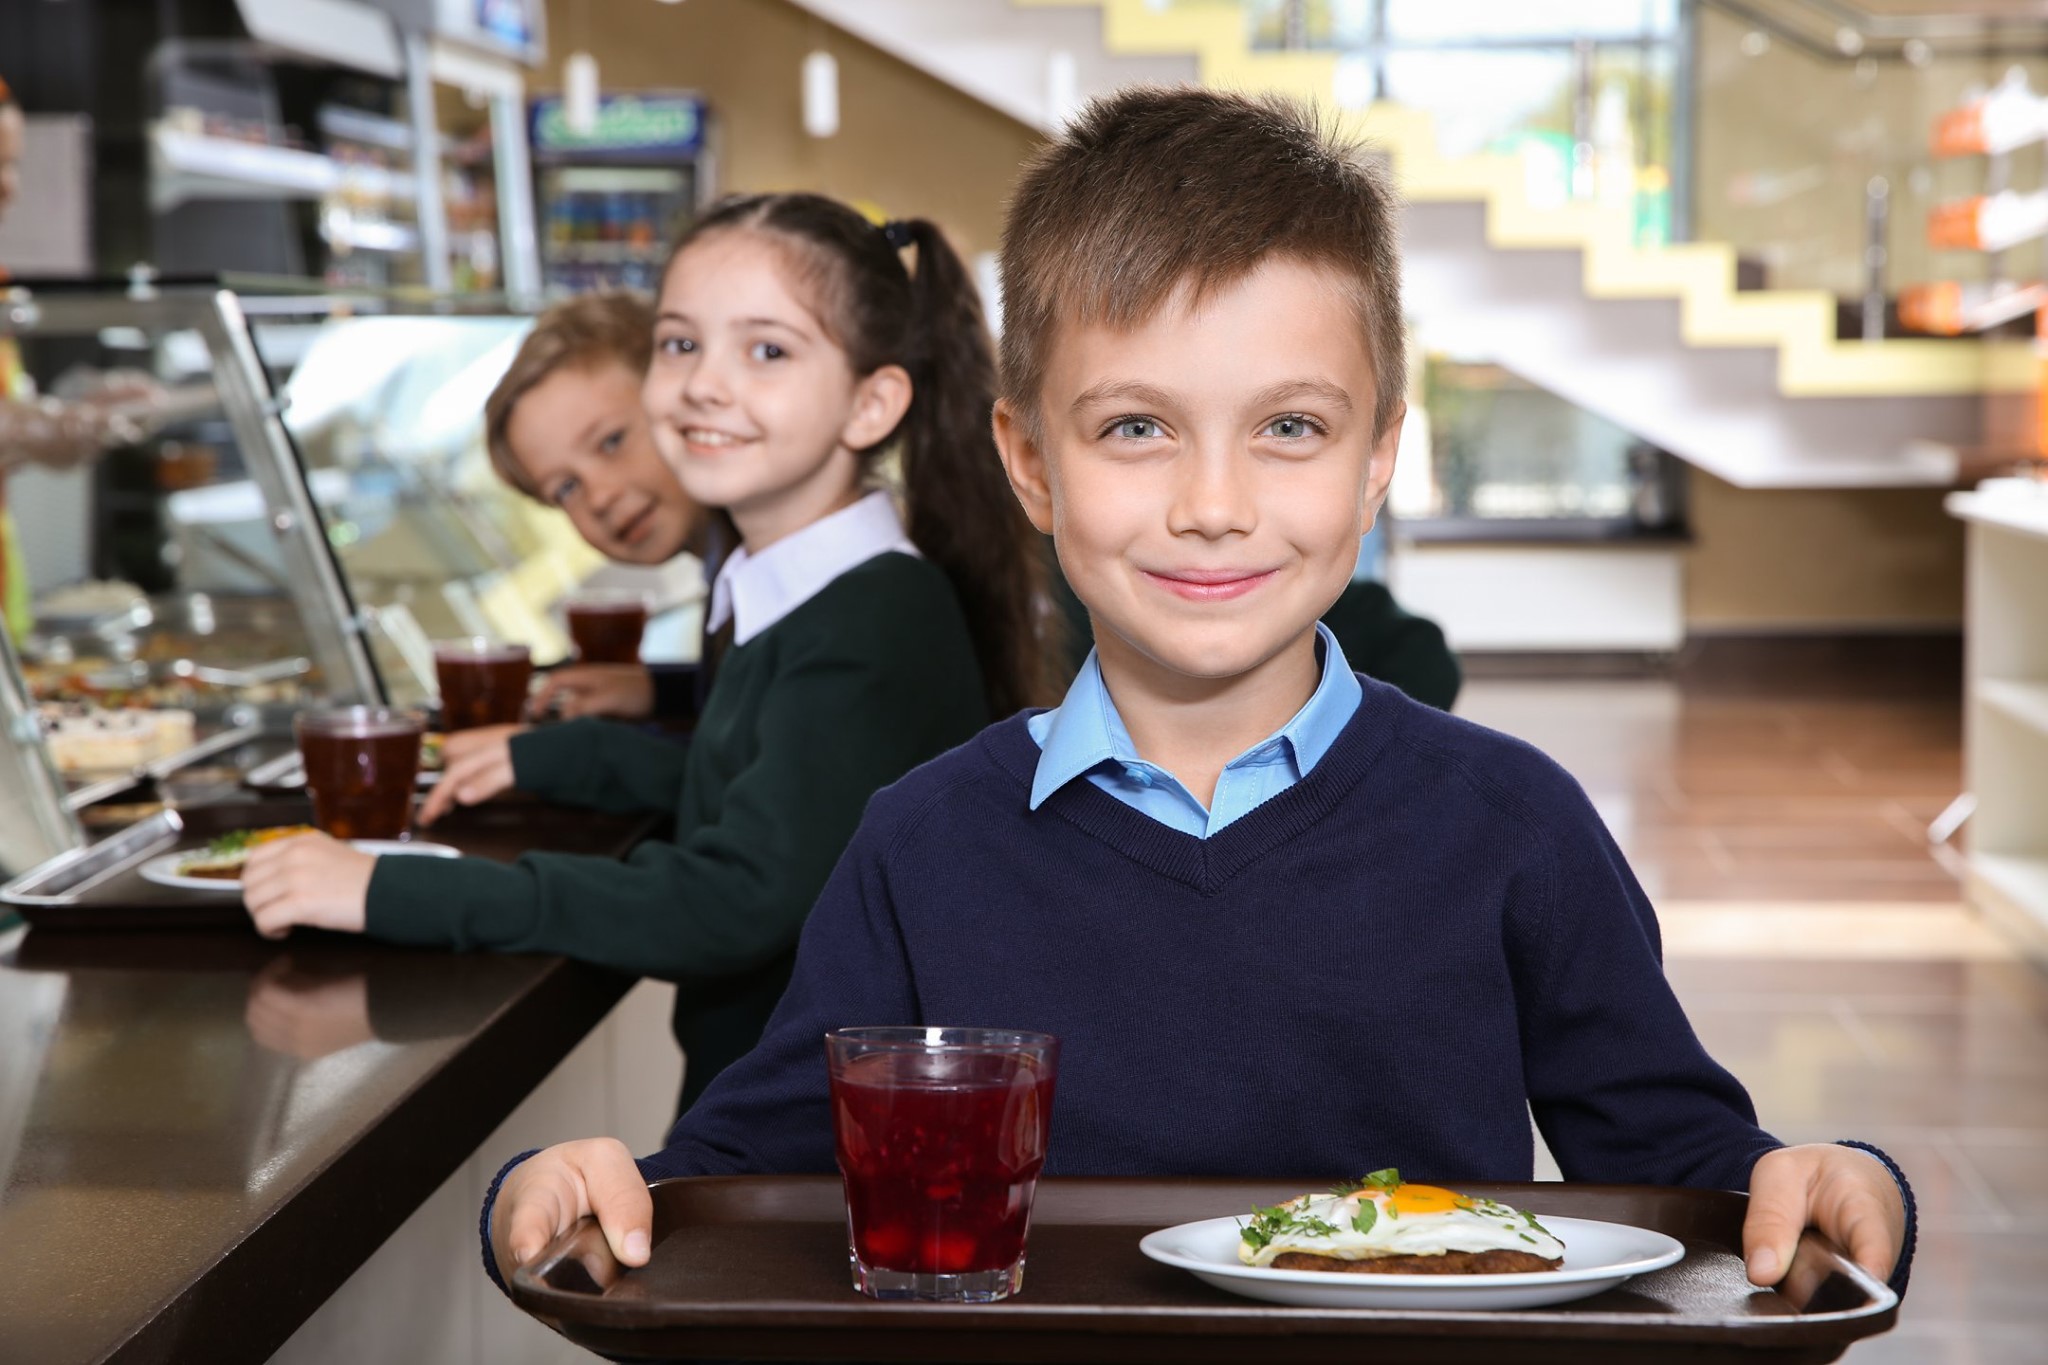 ​Universal Primary School Free Meals roll-out to start in September